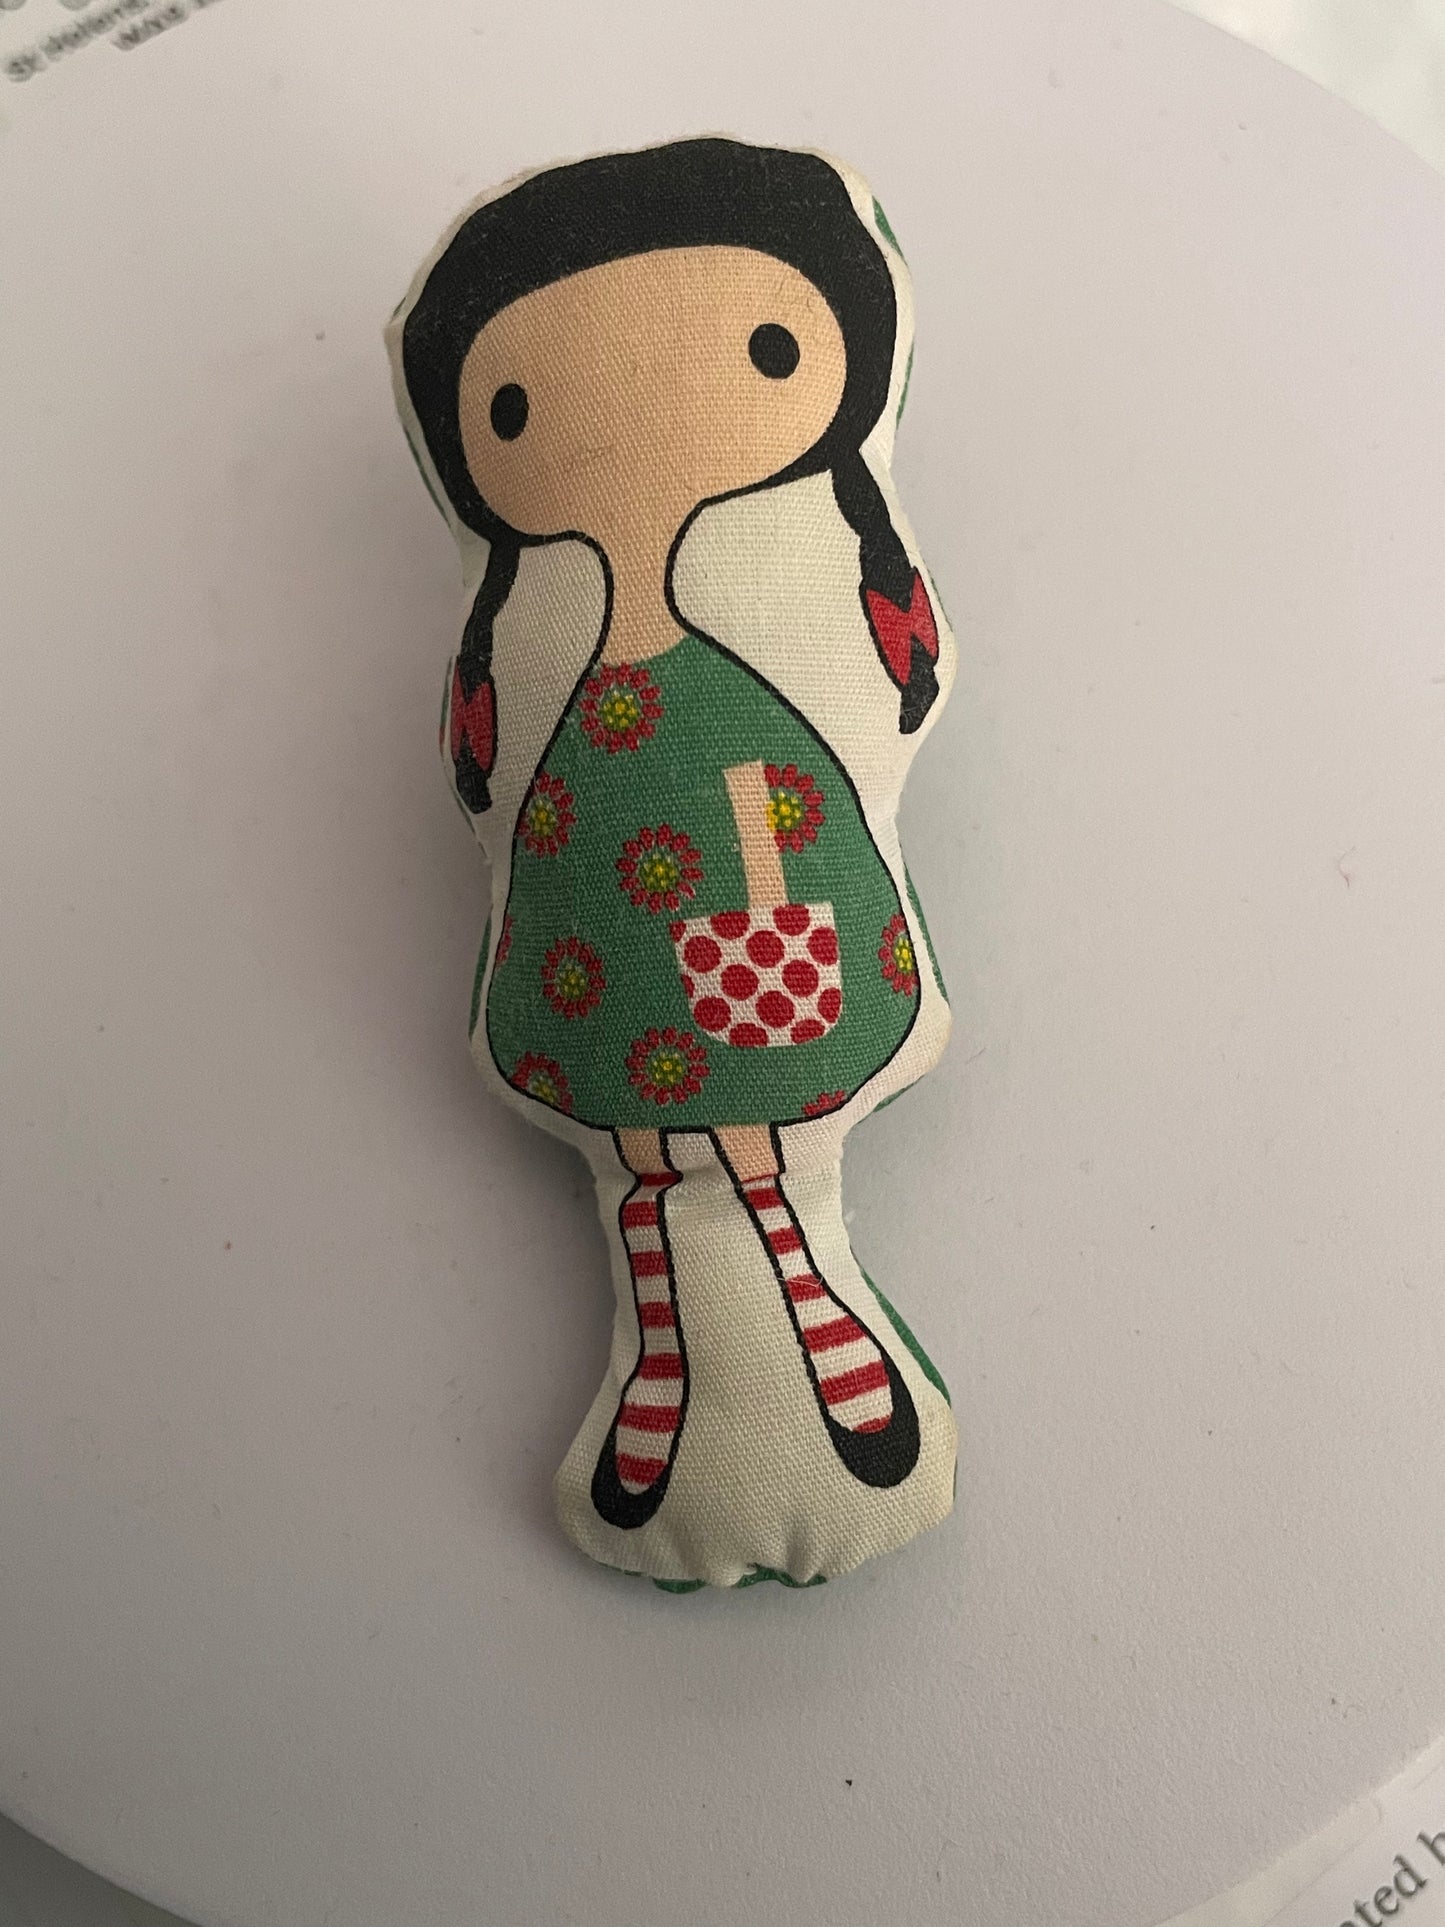 Vintage 1980s 1990s Cute Litte Fabric Padded Pippi Longstocking Style Figure Pin Brooch